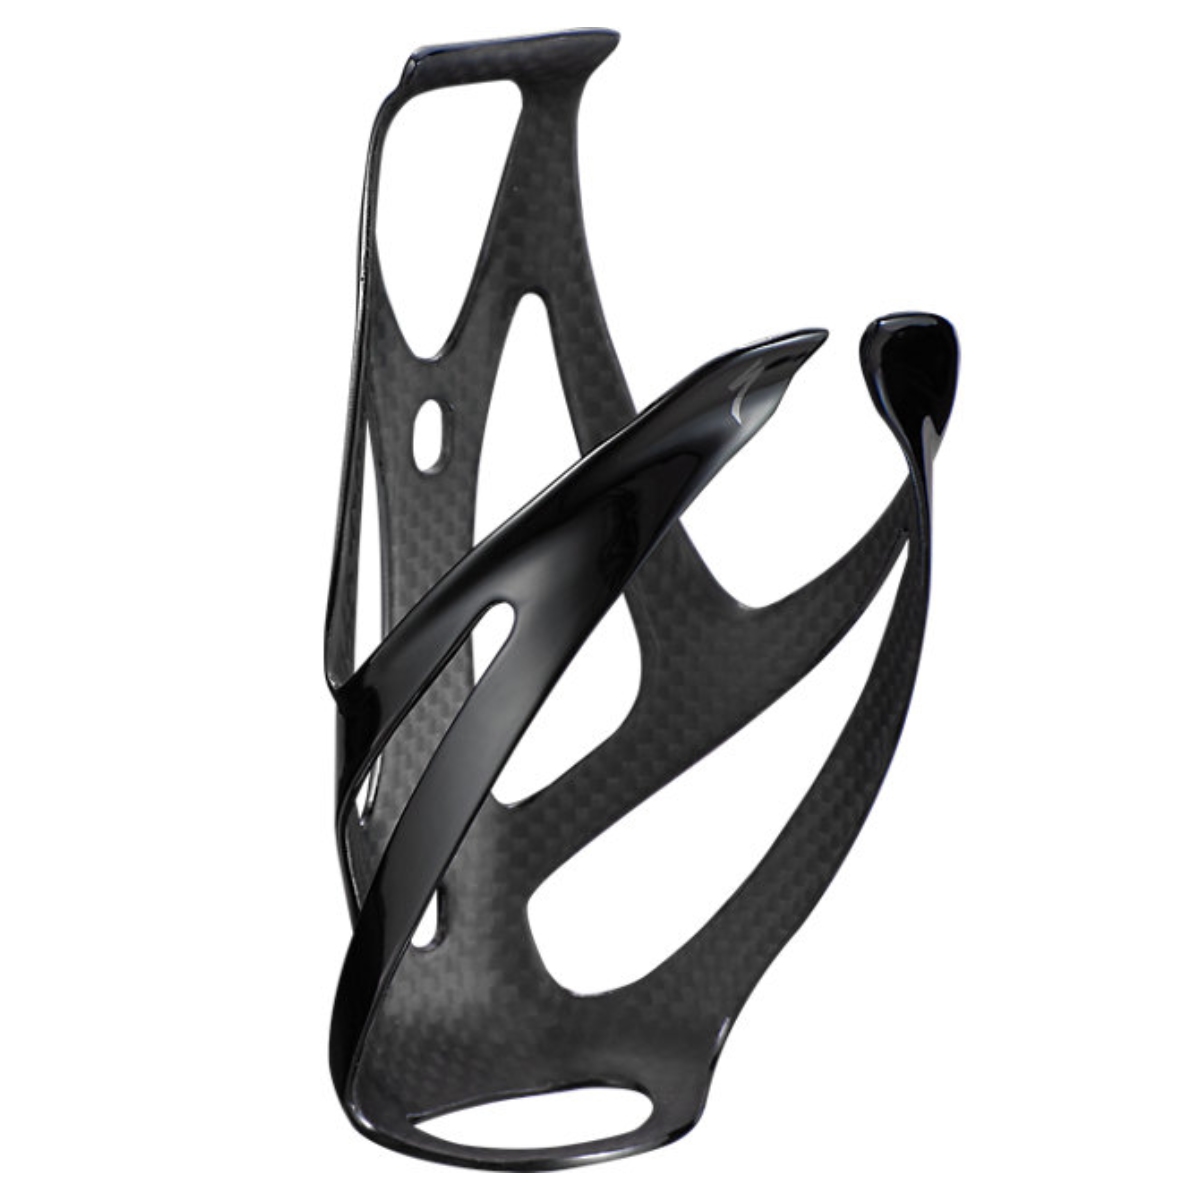 PORTE-BOUTEILLE SPECIALIZED S-WORKS RIB CAGE III